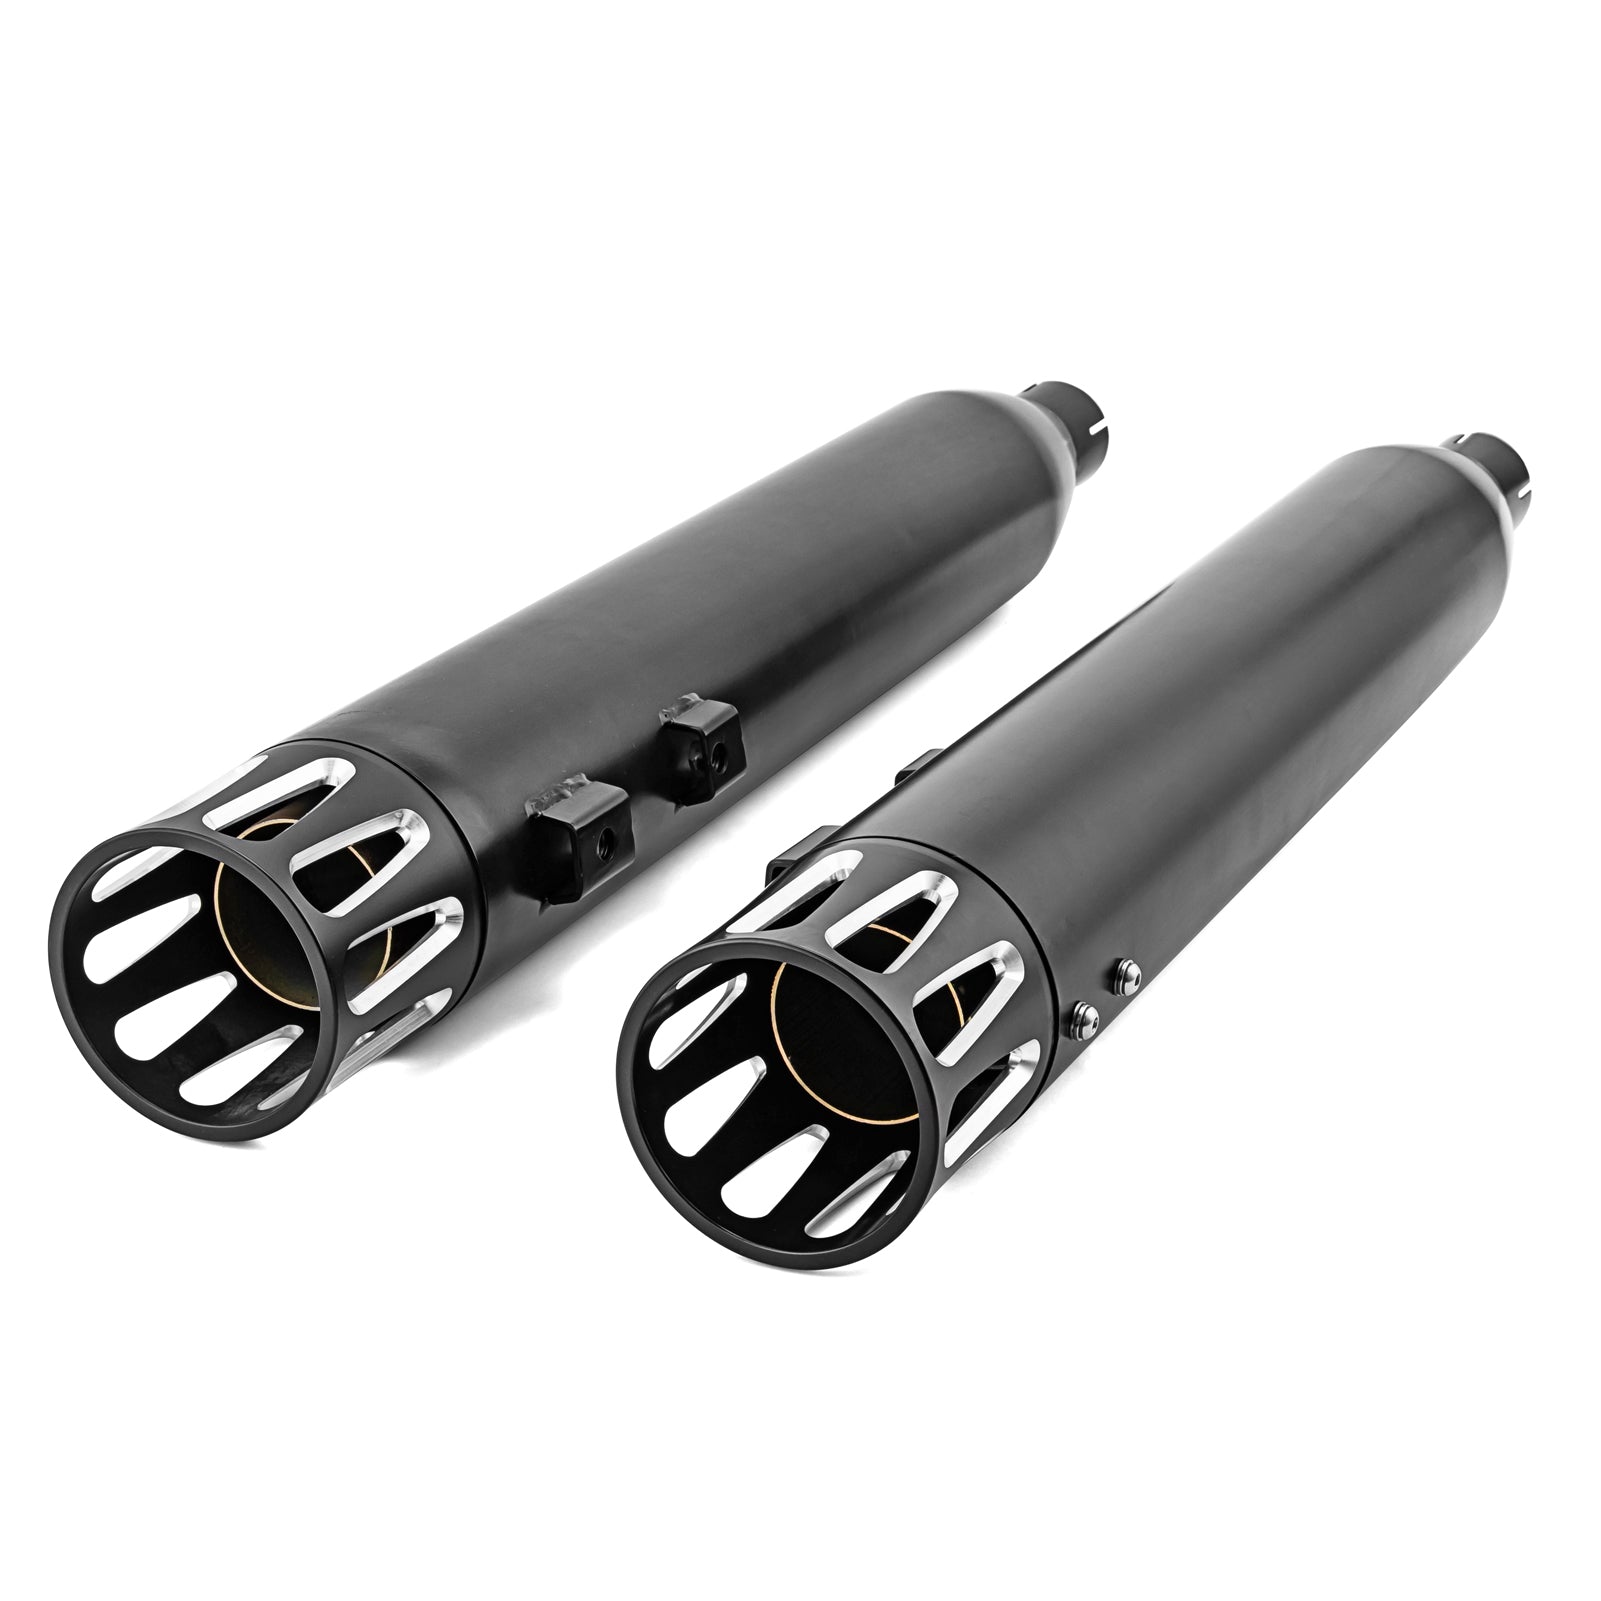 Chrome 4" Slip-On Mufflers Exhaust, Exhaust Pipes For 1995-2016 Harley Davidson Touring